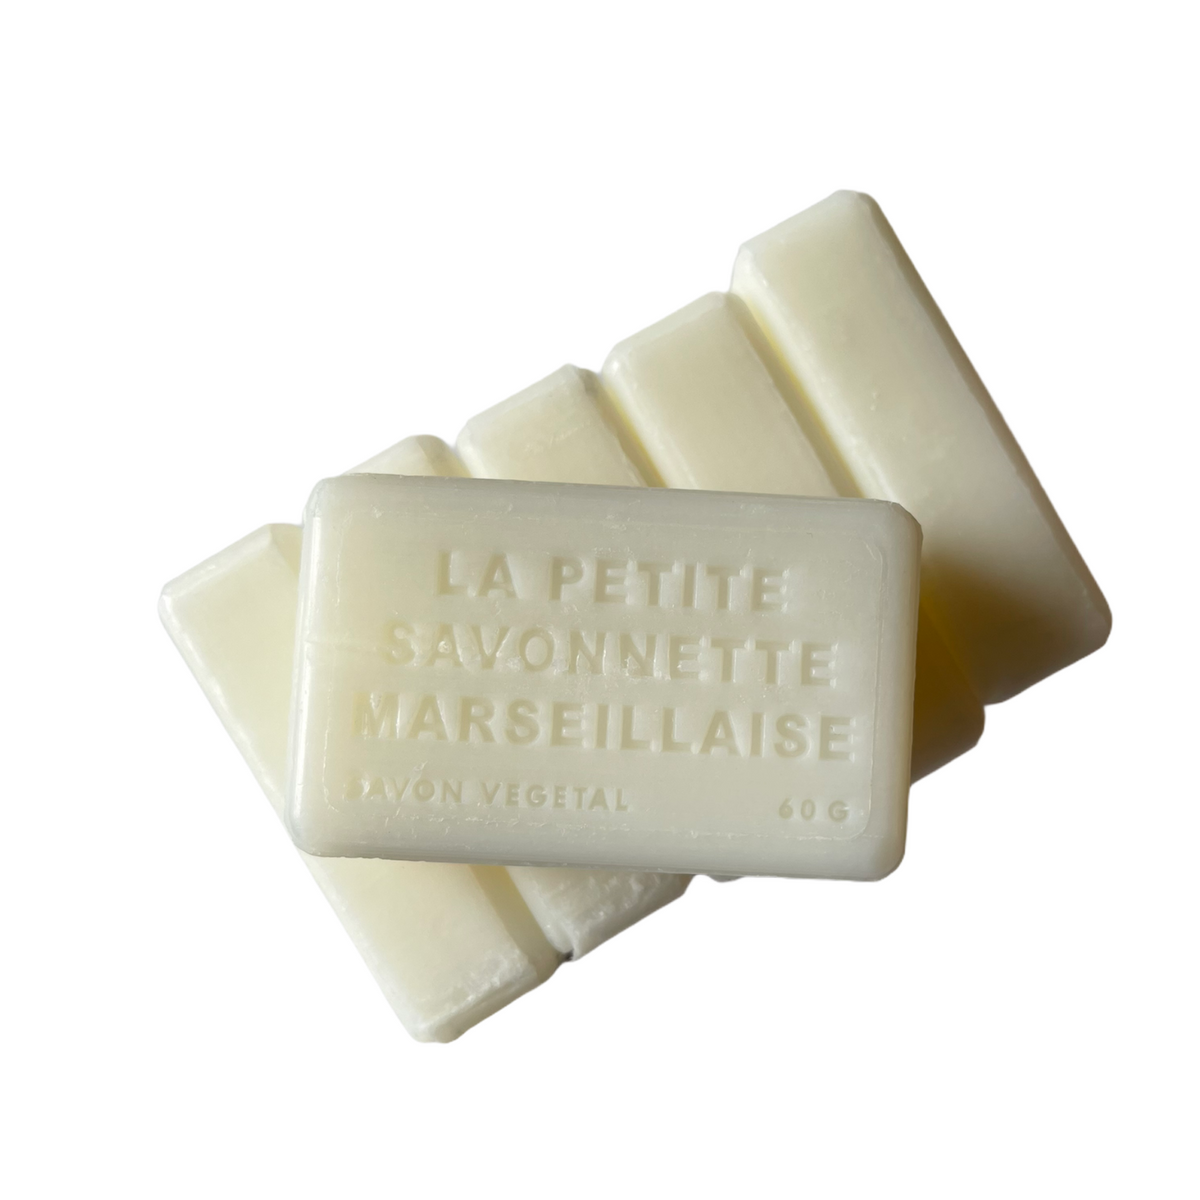 Muguet / Lily of the Valley French Soap Bar 125g